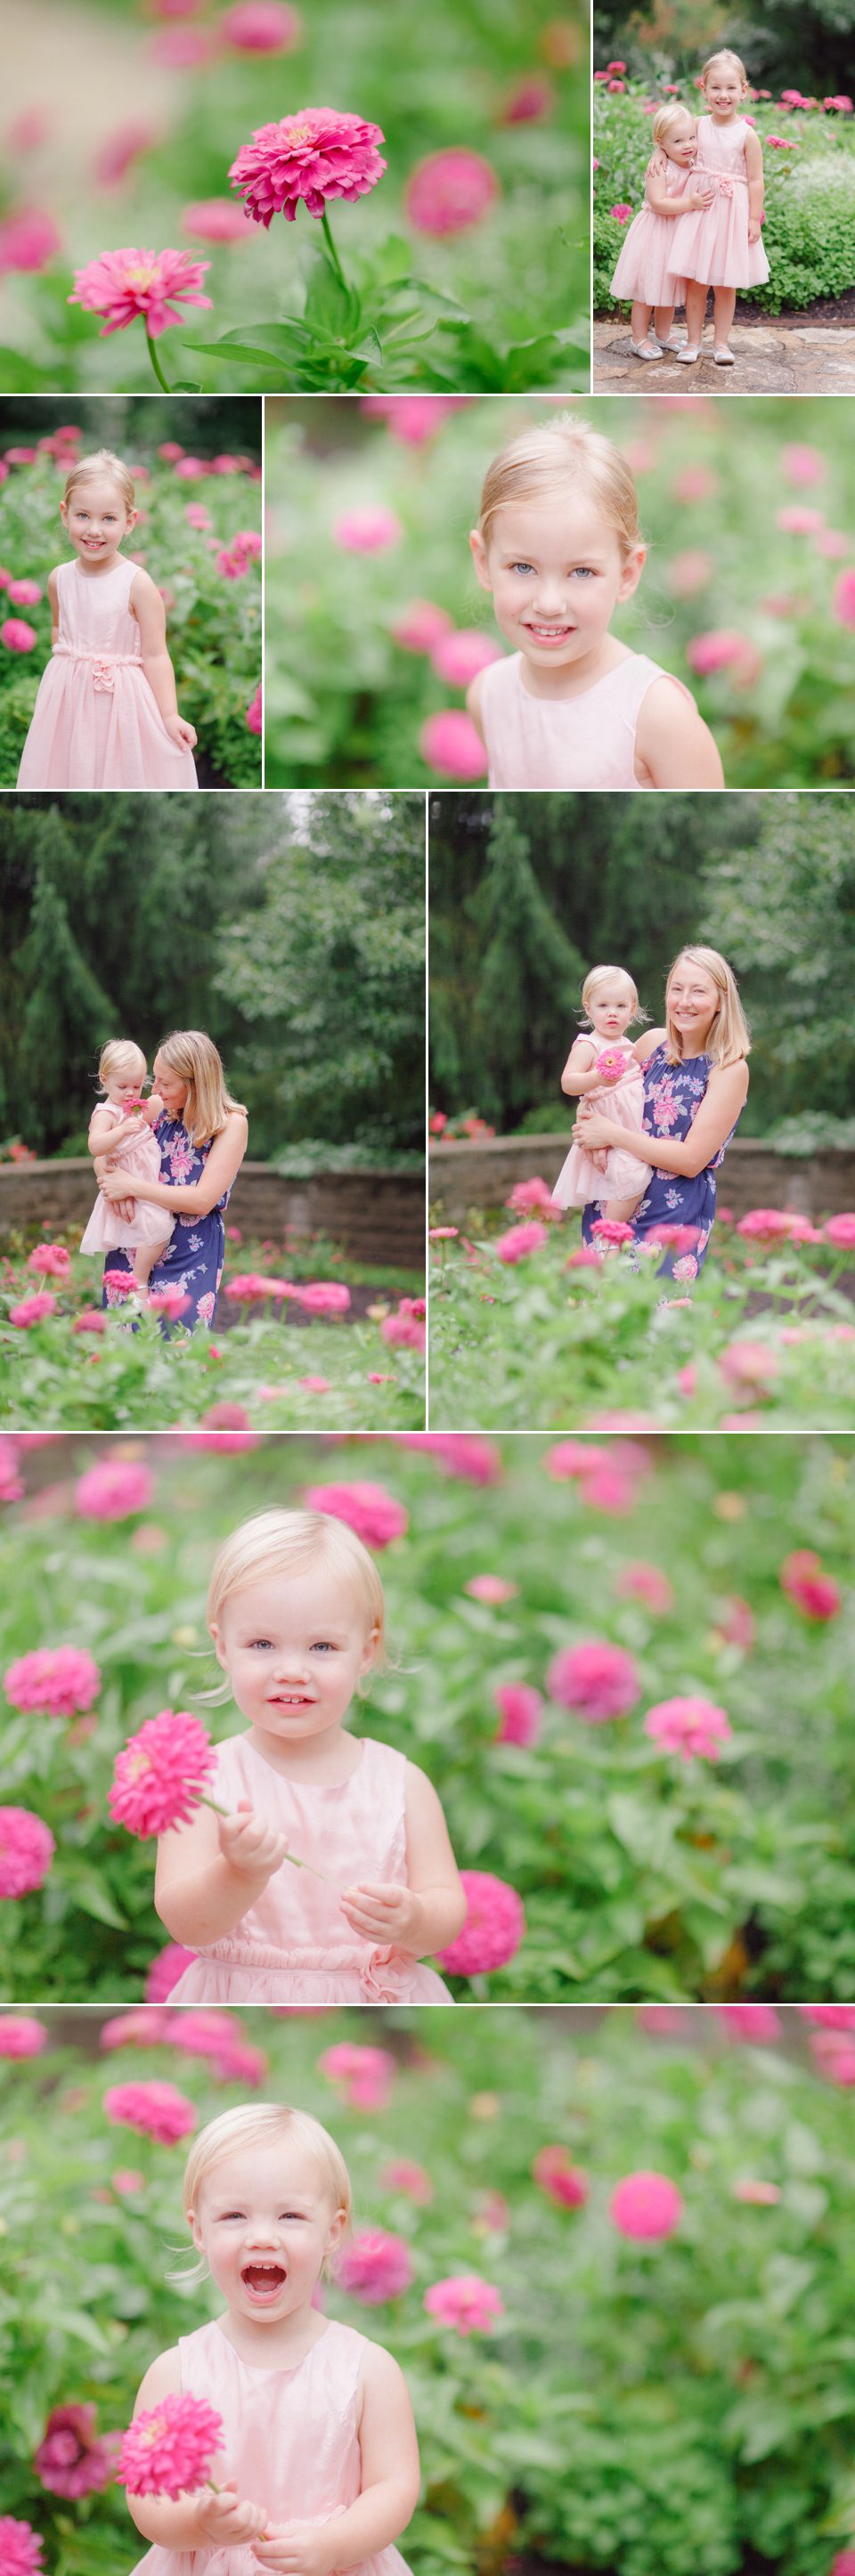 Athens, Ga children photos of sisters in a garden of pink flowers.